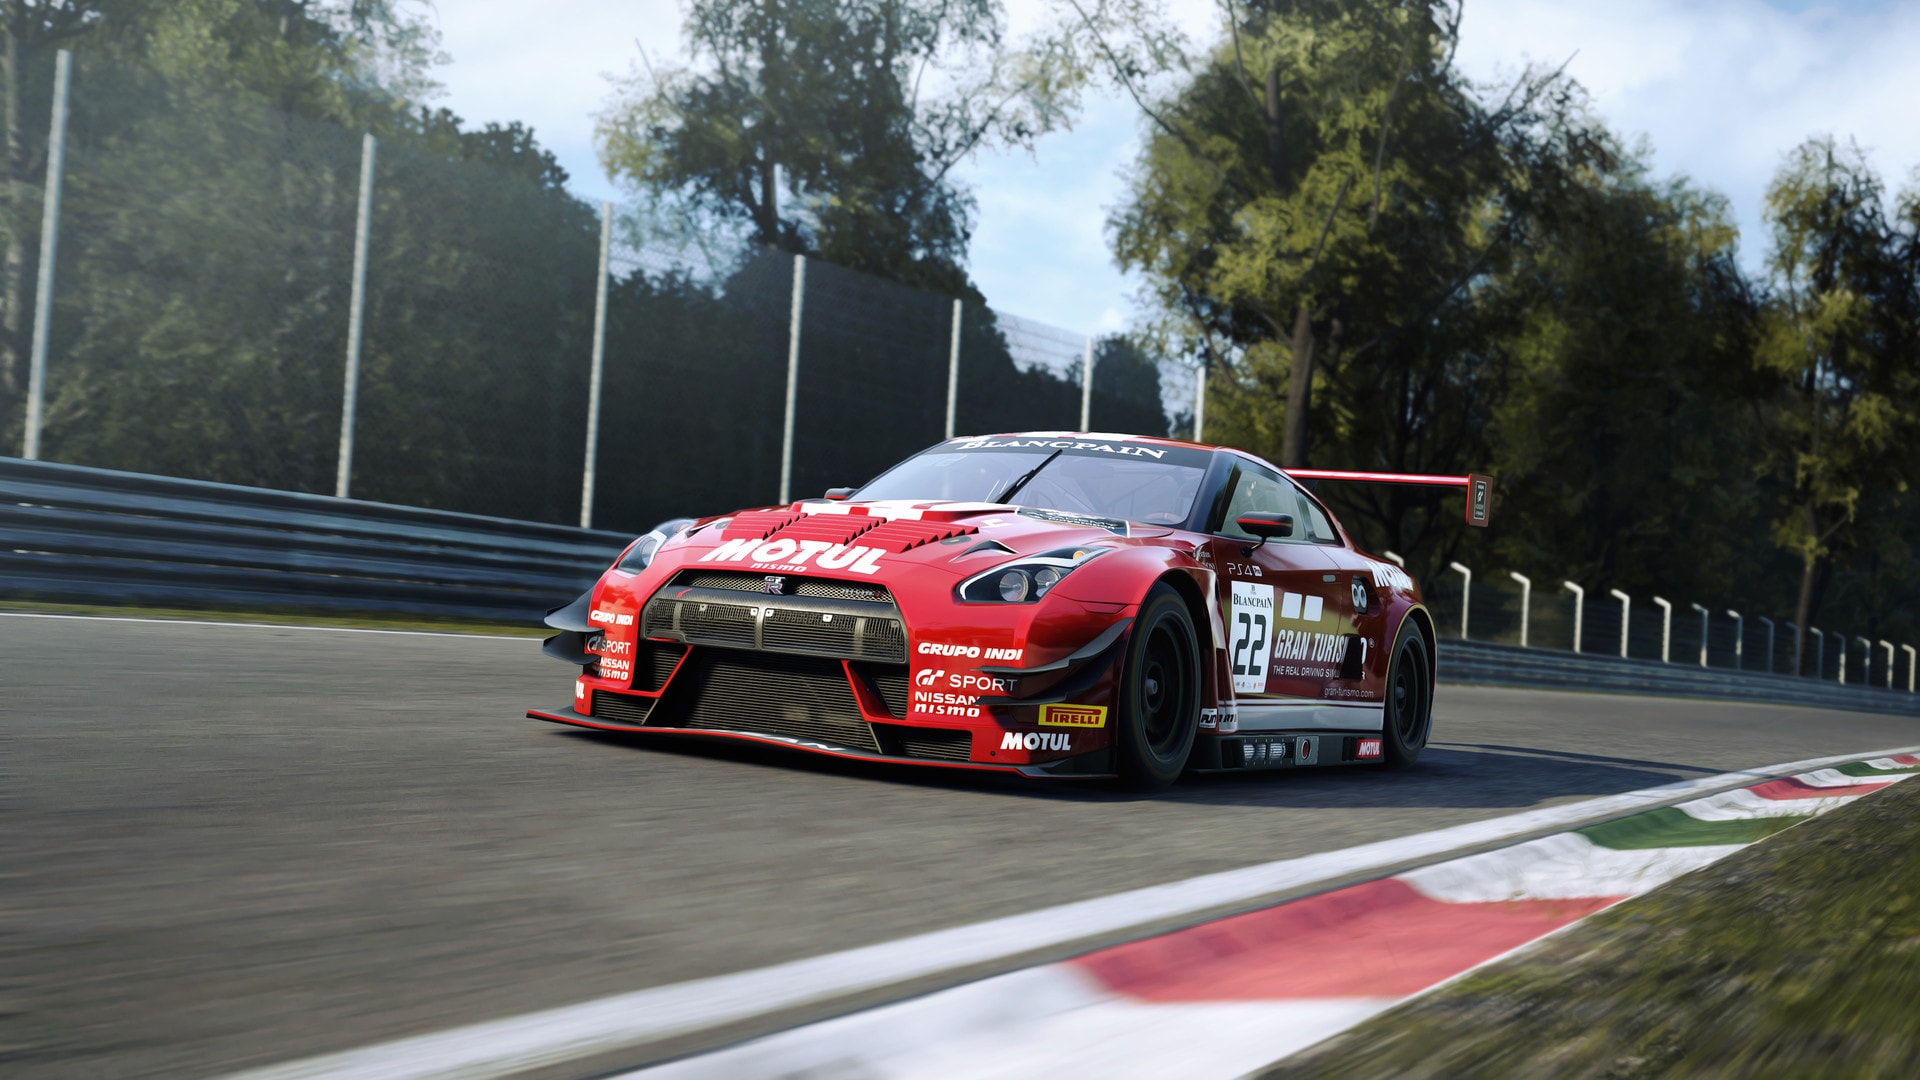 Assetto Corsa Competizione Is Free To Play For A Limited Time